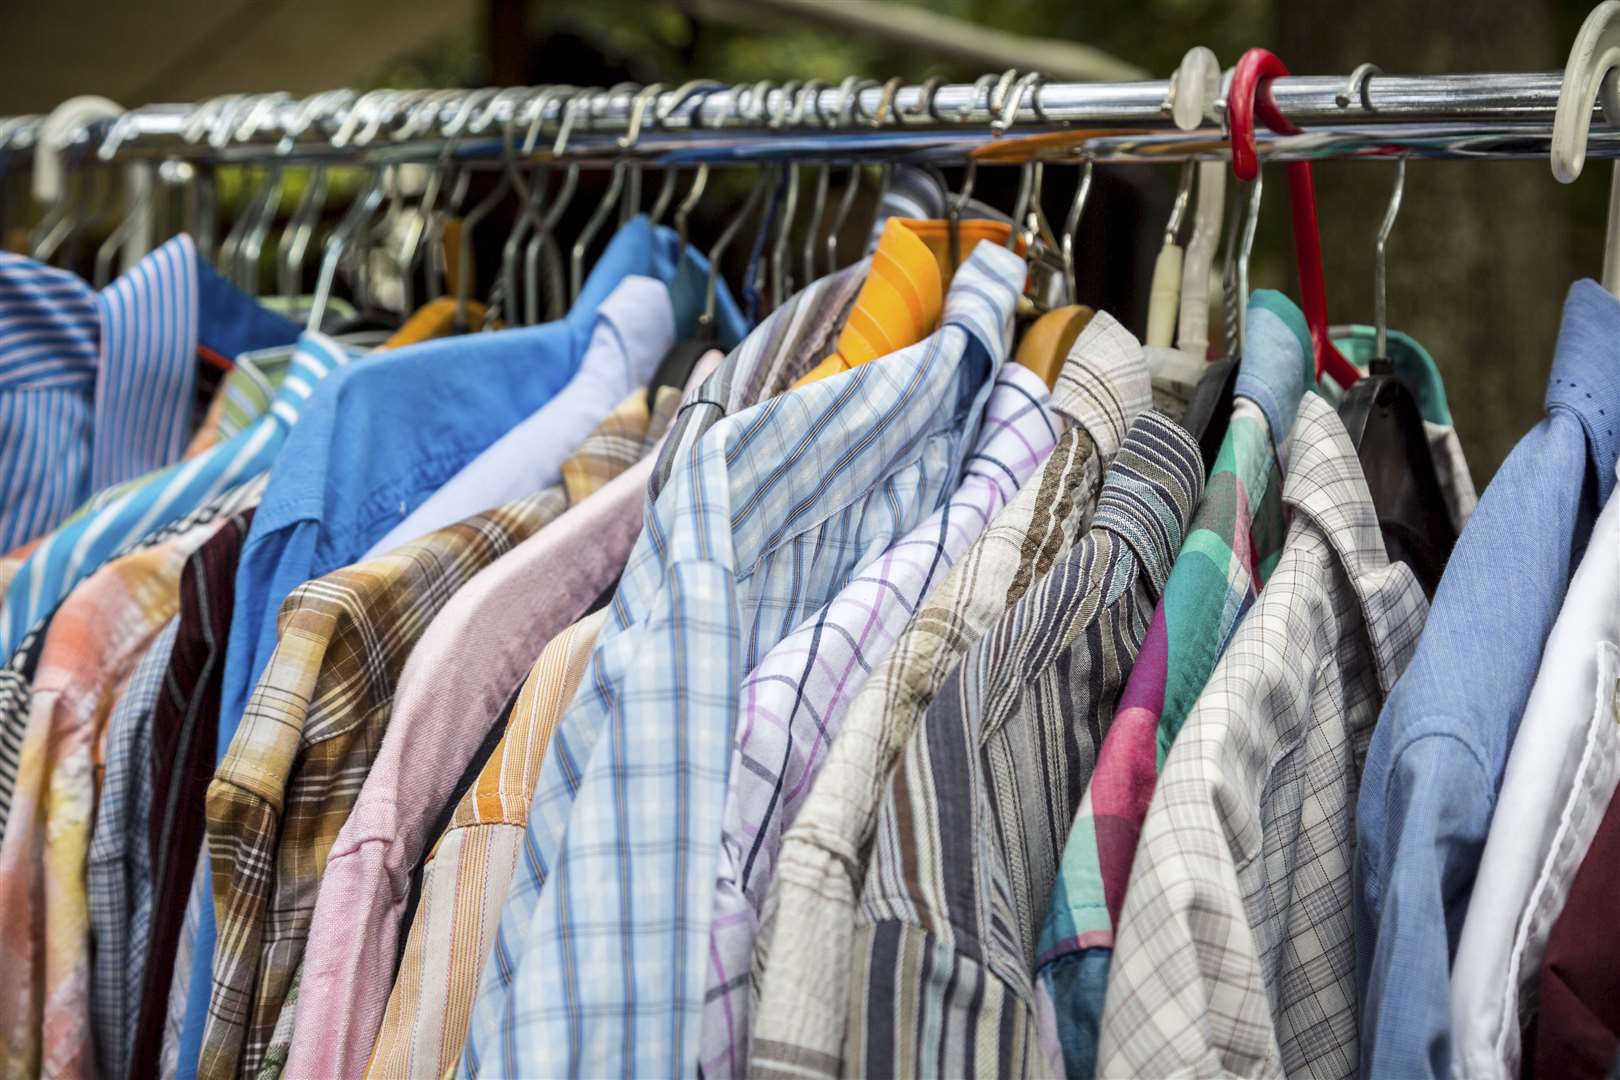 Check all the rails regardless of whether clothes are in the men's or women's department. Picture: iStock.